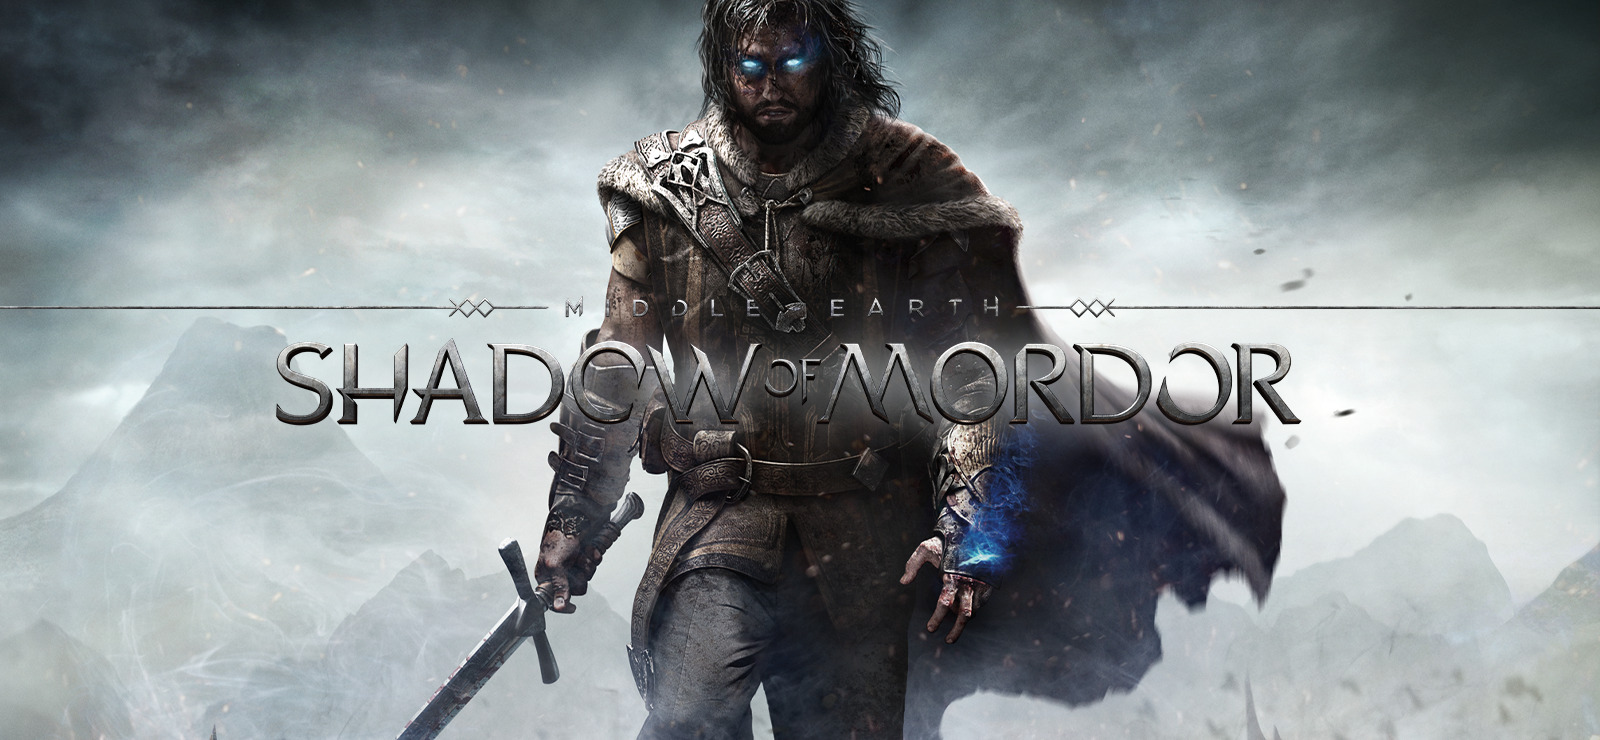 gewicht schaak invoeren Middle-earth™: Shadow of Mordor™ Game of the Year Edition on GOG.com